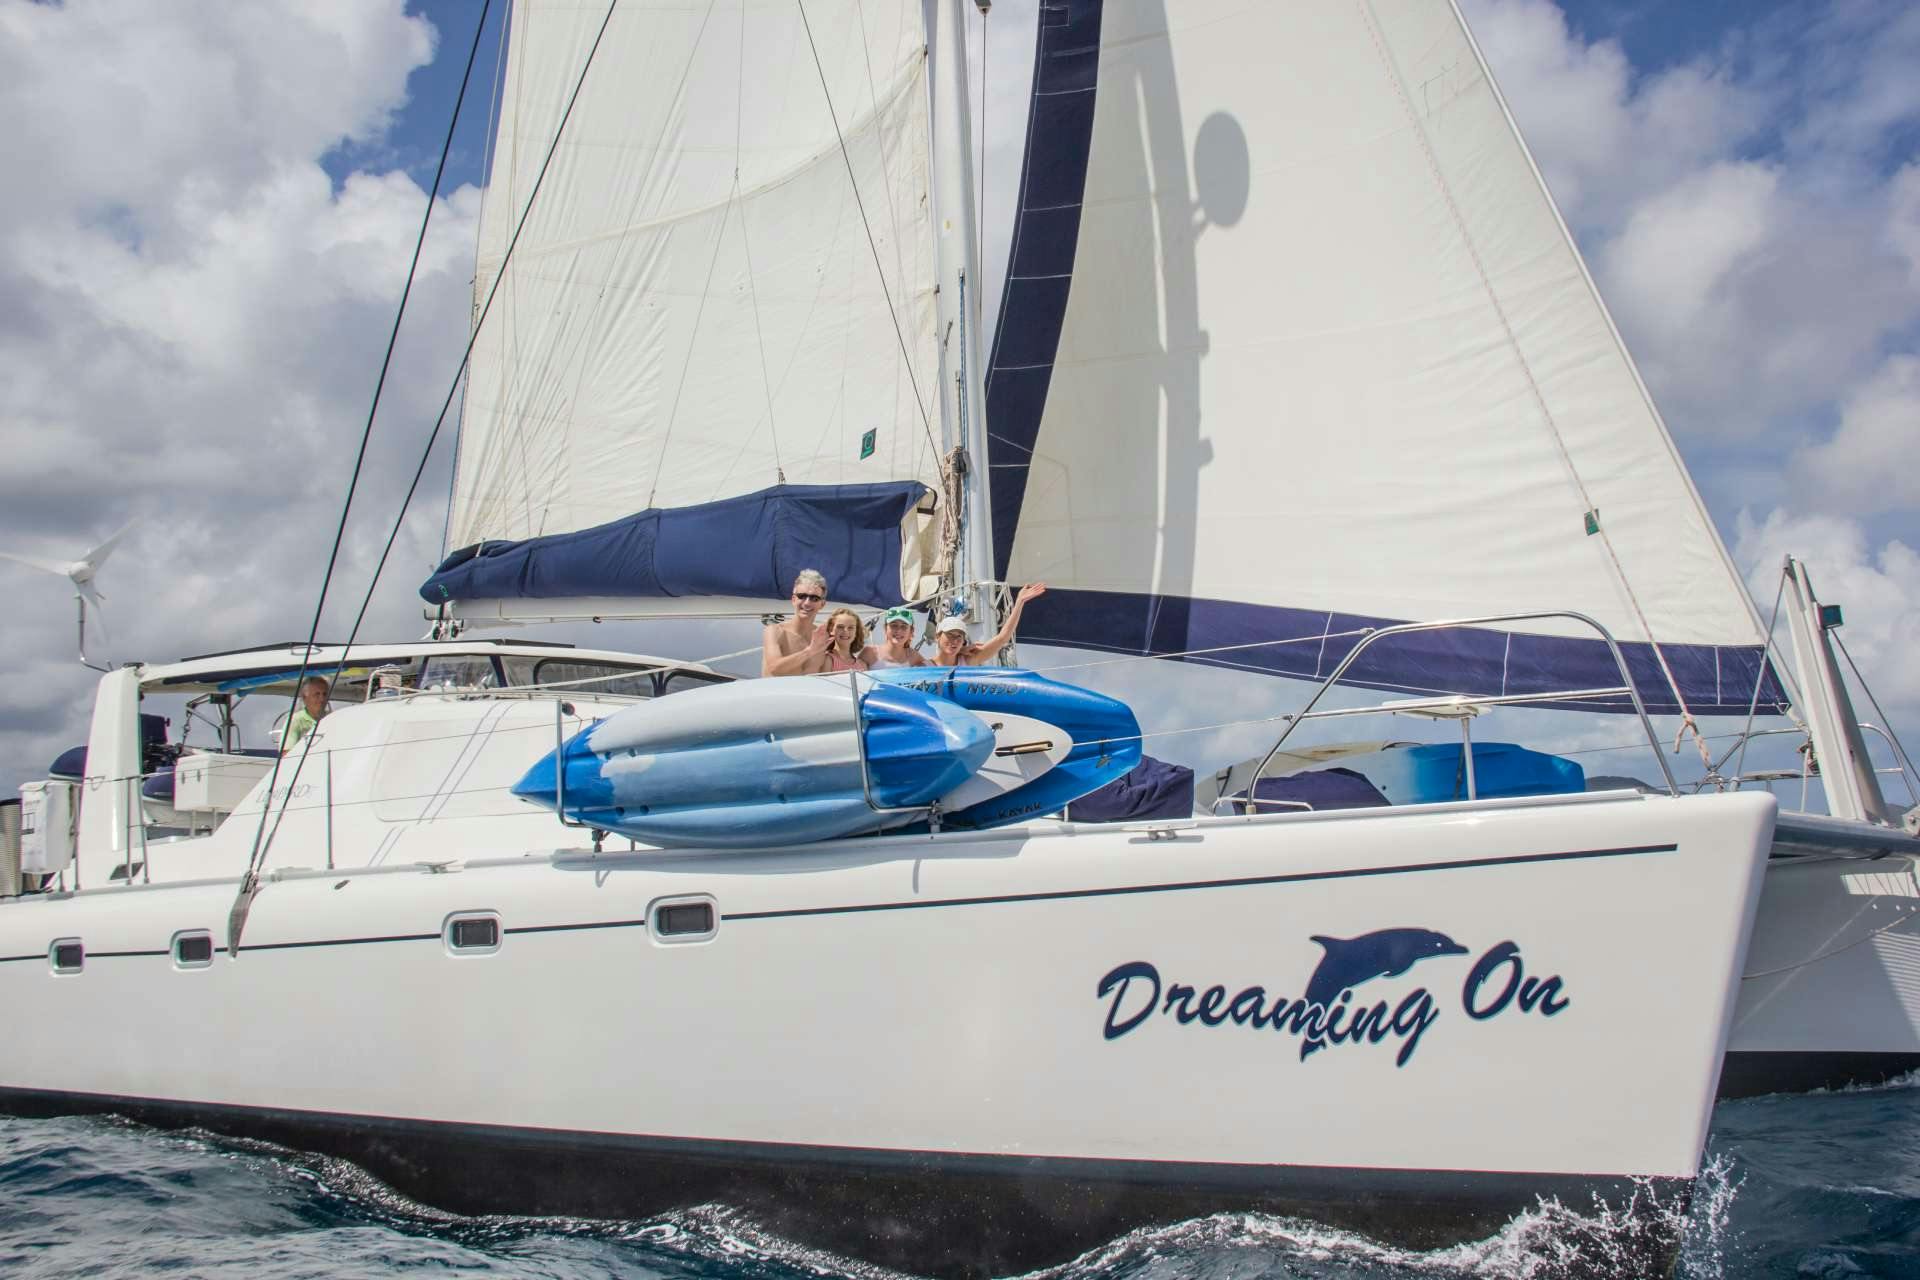 dreaming on - Yacht Charter Placencia & Boat hire in Central america, Belize 2